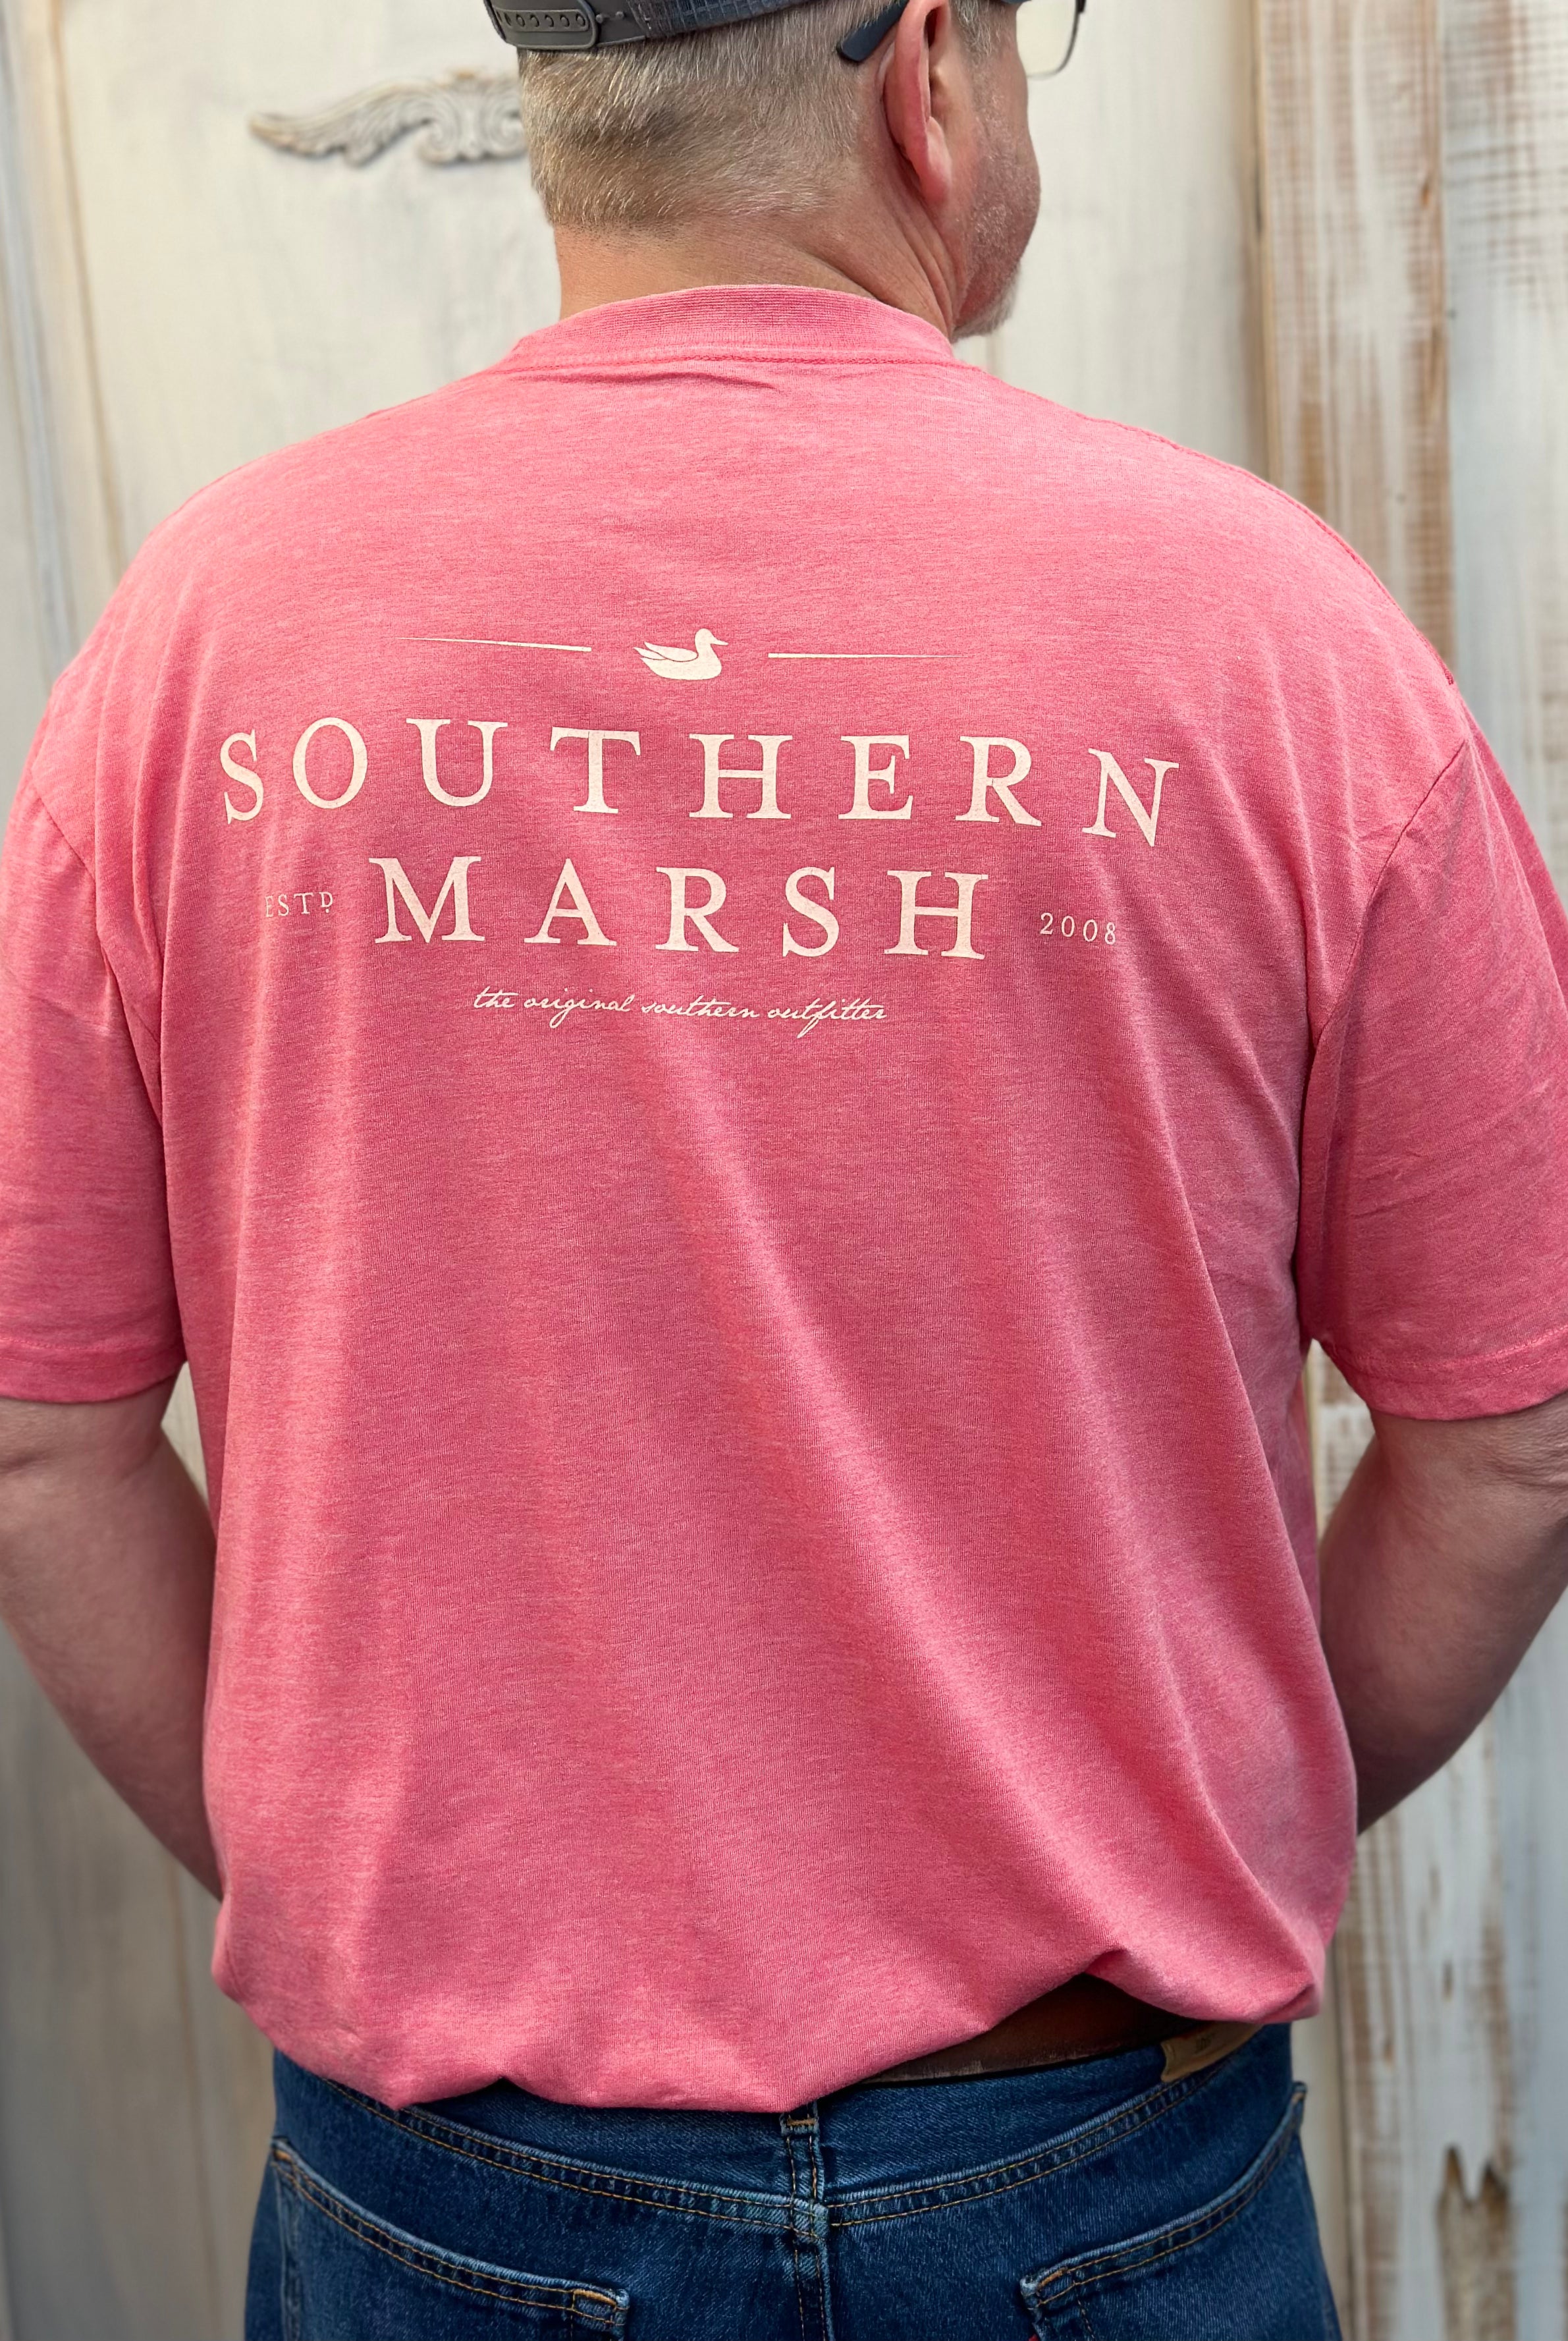 Southern Marsh, Accessories, Men's Apparel